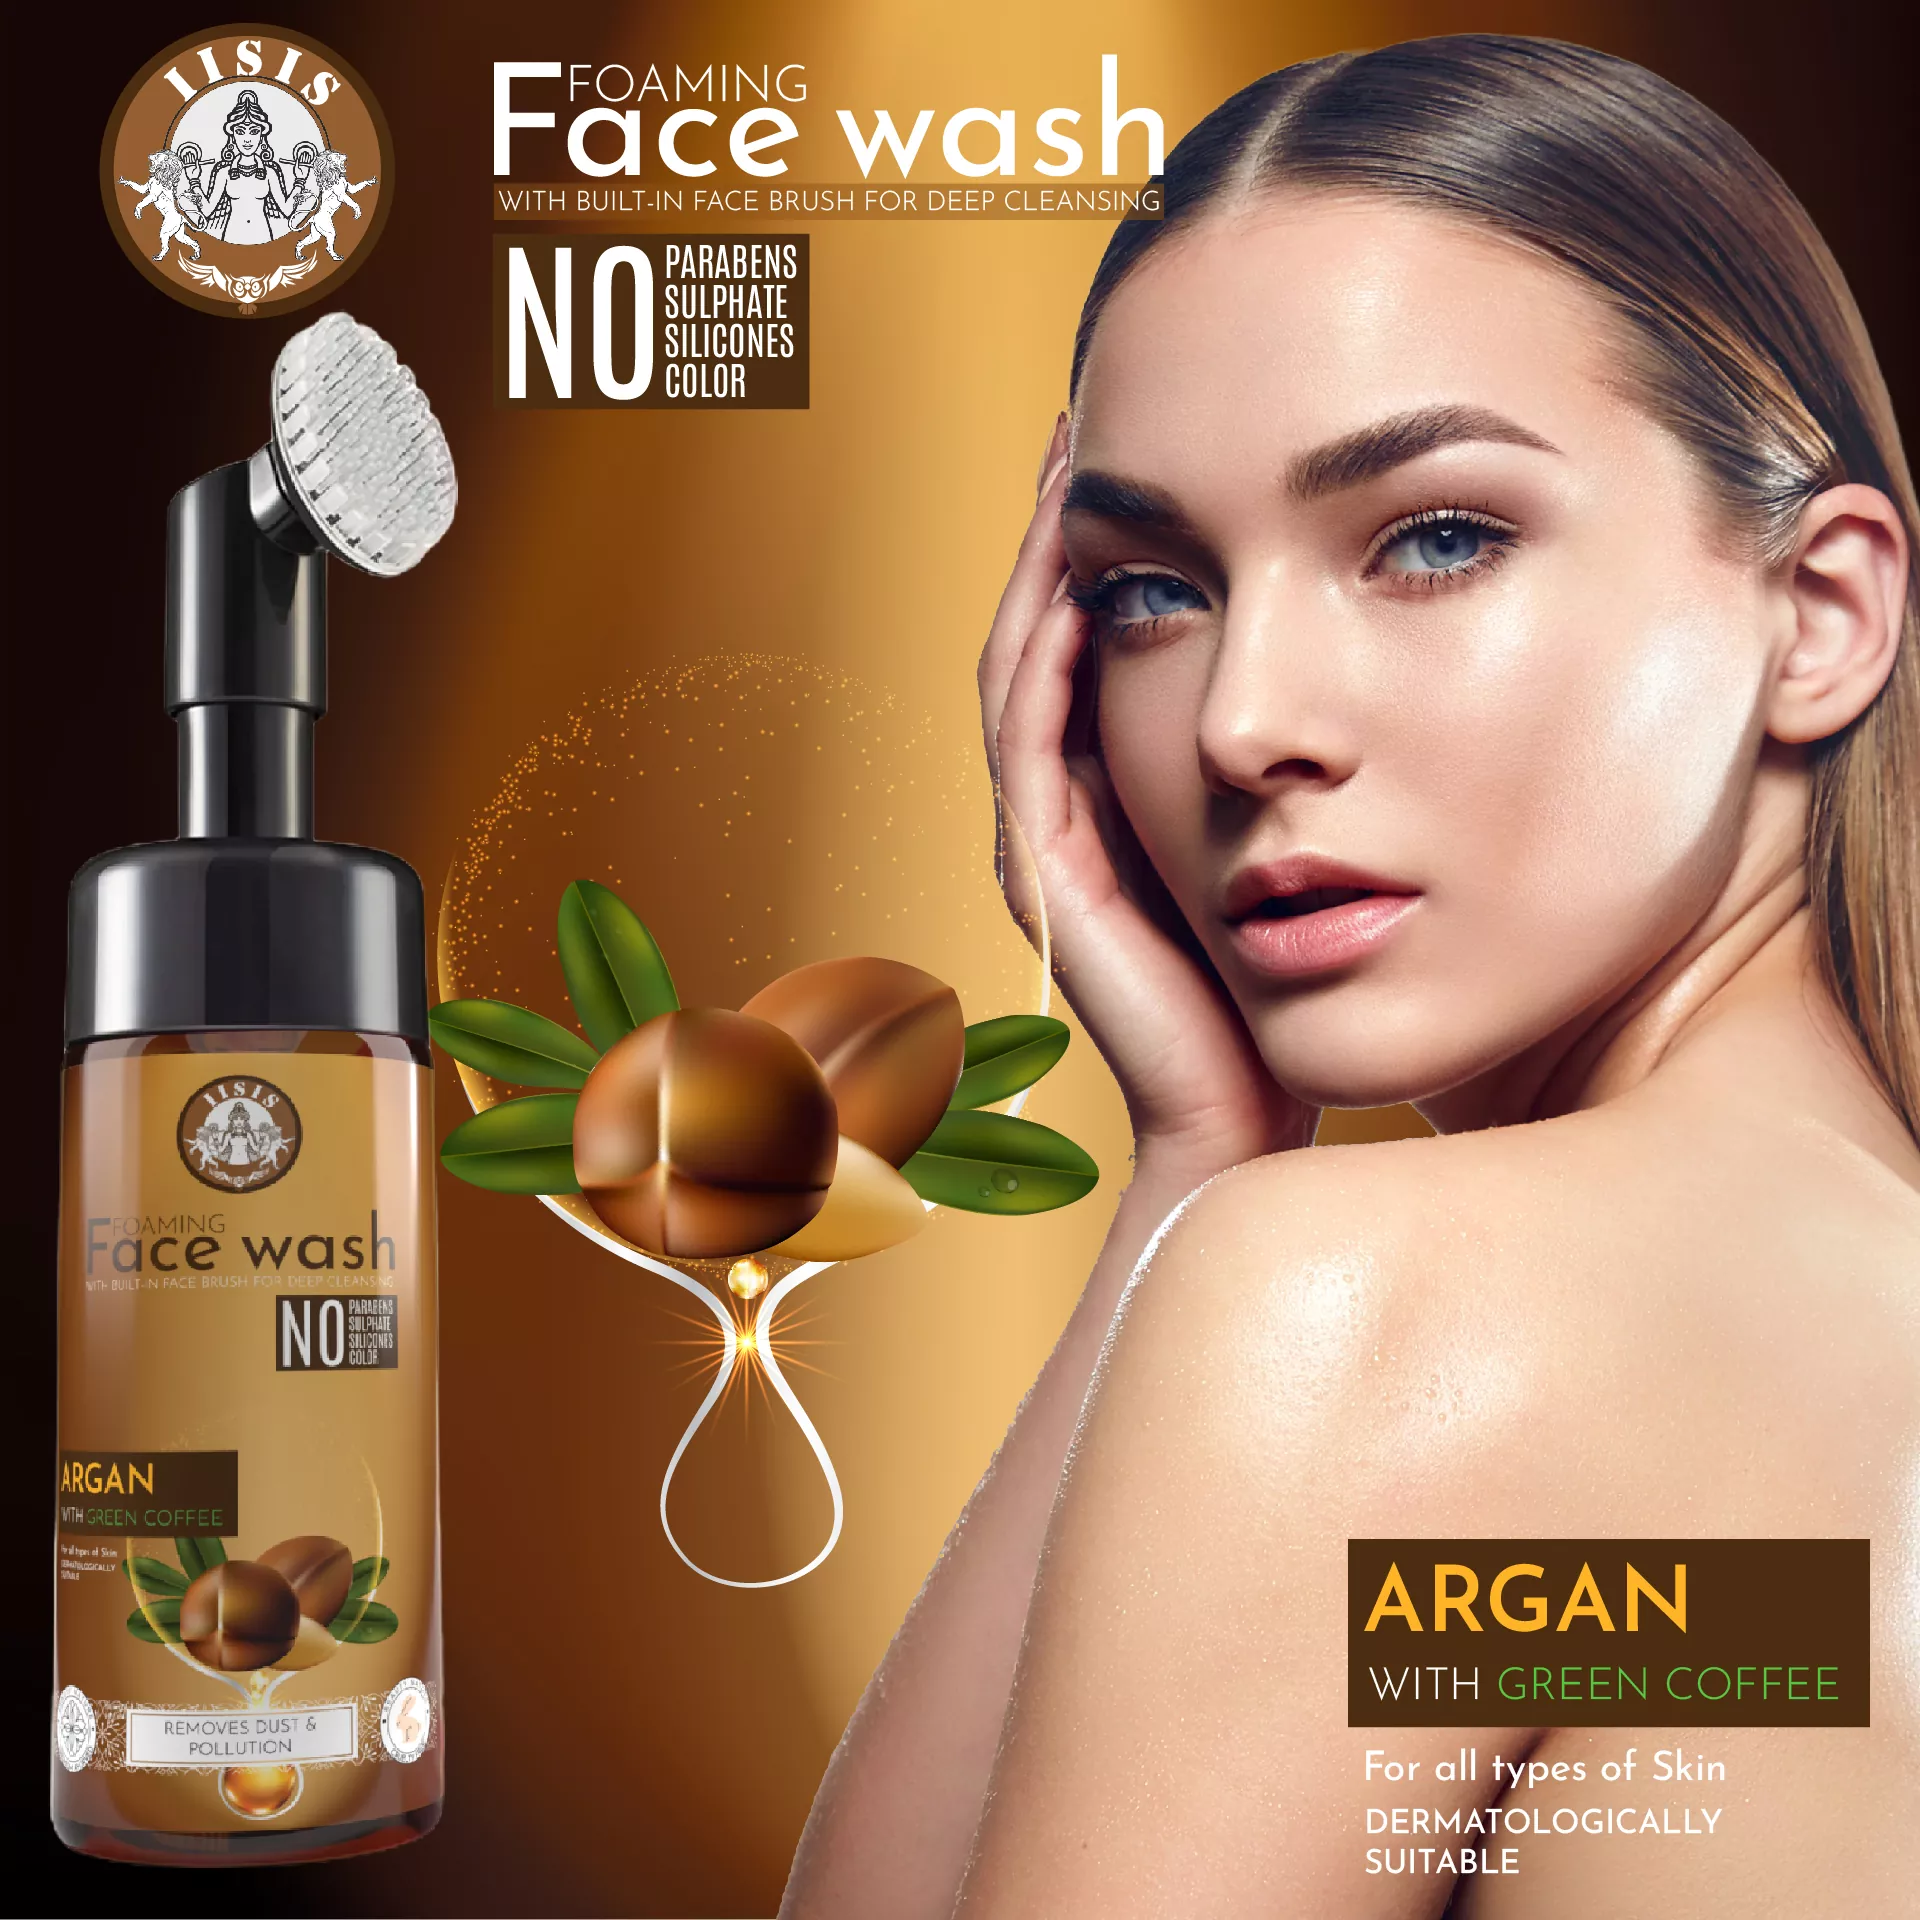 Argan With Green Coffee Foaming Face Wash With Built-In Face Brush (150ml)